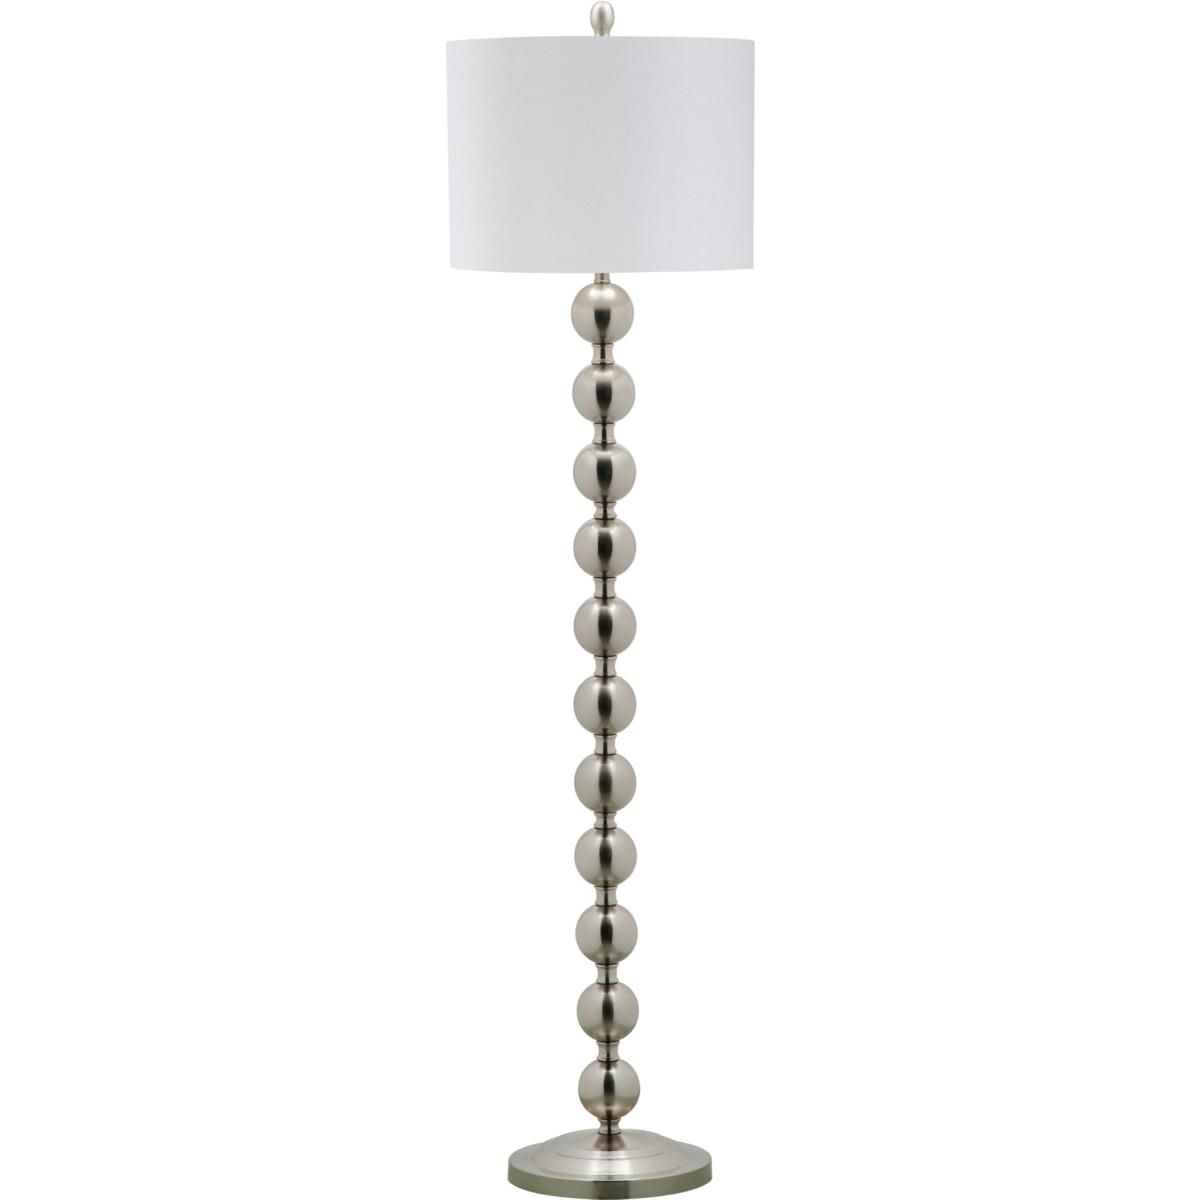 Safavieh Reflections 58 1/2" Stacked Ball Floor Lamp – 8422283 | Hsn With Regard To 58 Inch Floor Lamps (Gallery 19 of 20)